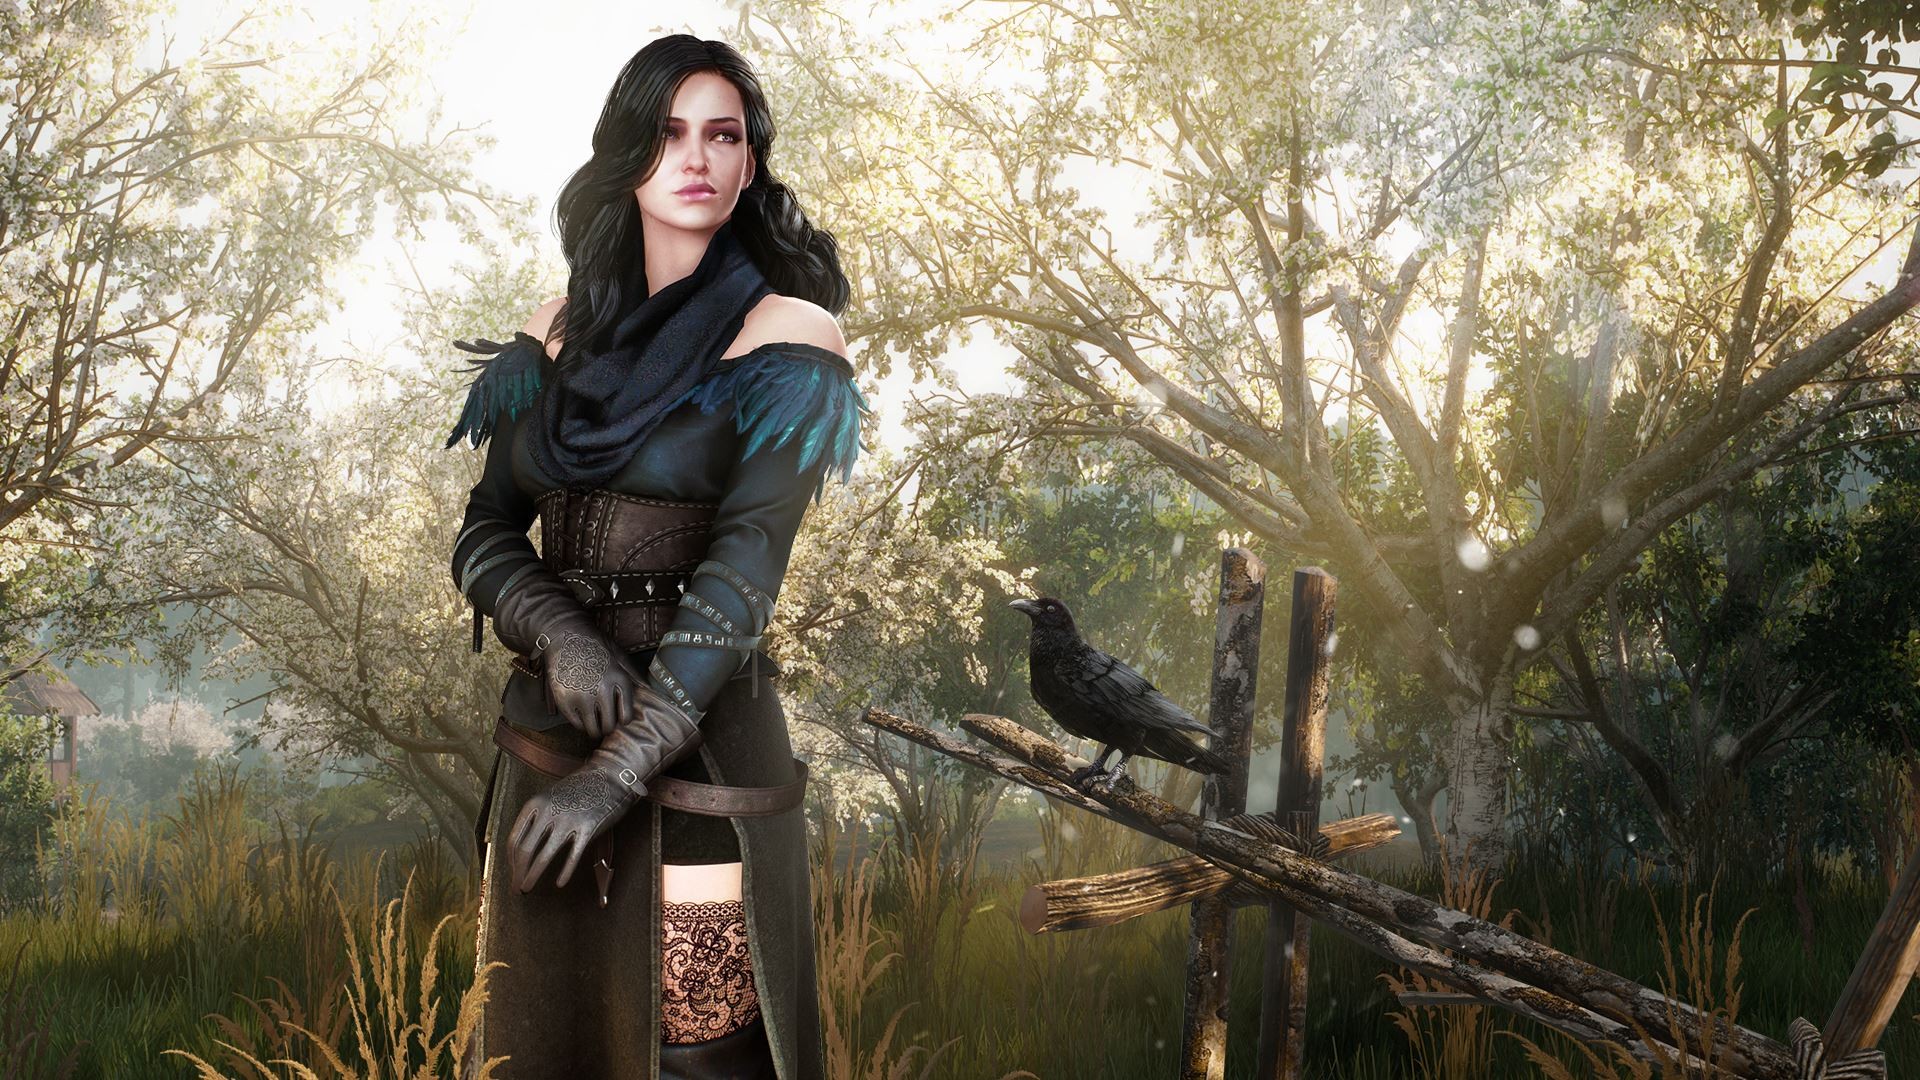 yennefer of vengerberg, the witcher 3: wild hunt, video game, the witcher for Windows